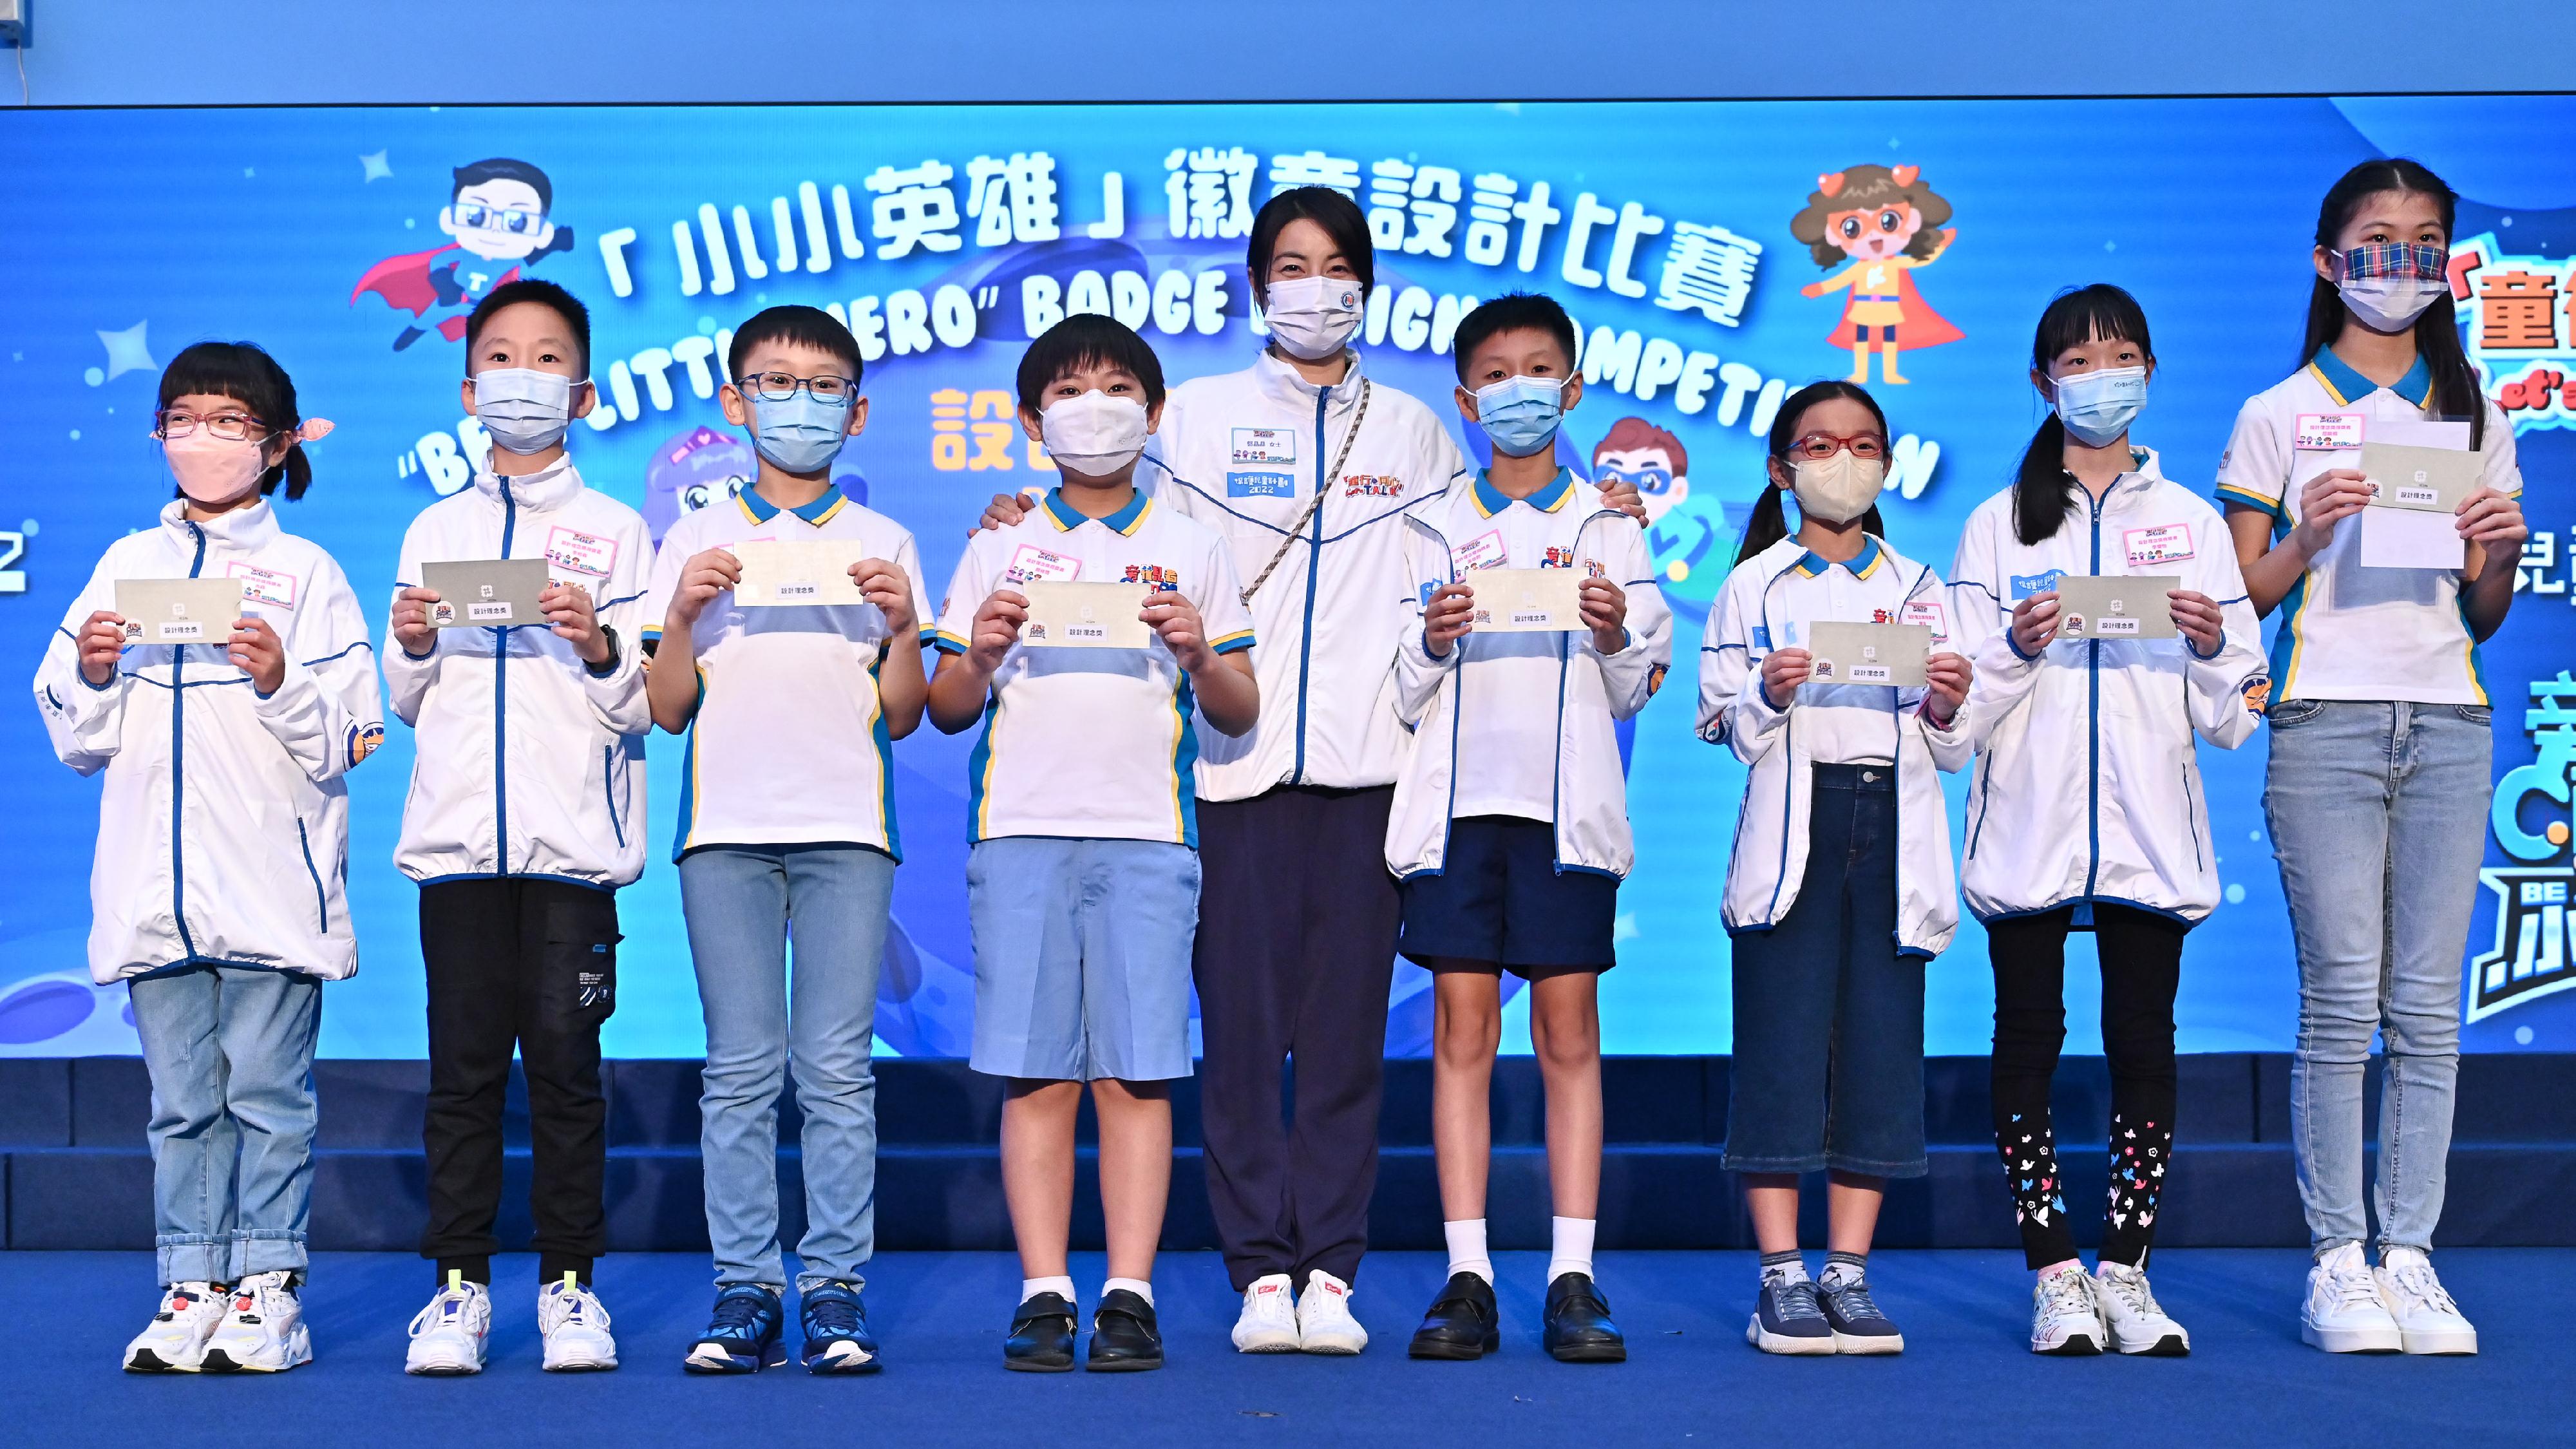 The Hong Kong Police Force held the Closing cum Award Presentation Ceremony for the "Let’s T.A.L.K. – Child Protection Campaign 2022" today (November 20). Photo shows the Ambassador of the Child Protection Campaign, Ms Guo Jingjing (centre), presenting the awards for “Be a Little Hero” Badge Design Competition to winners.